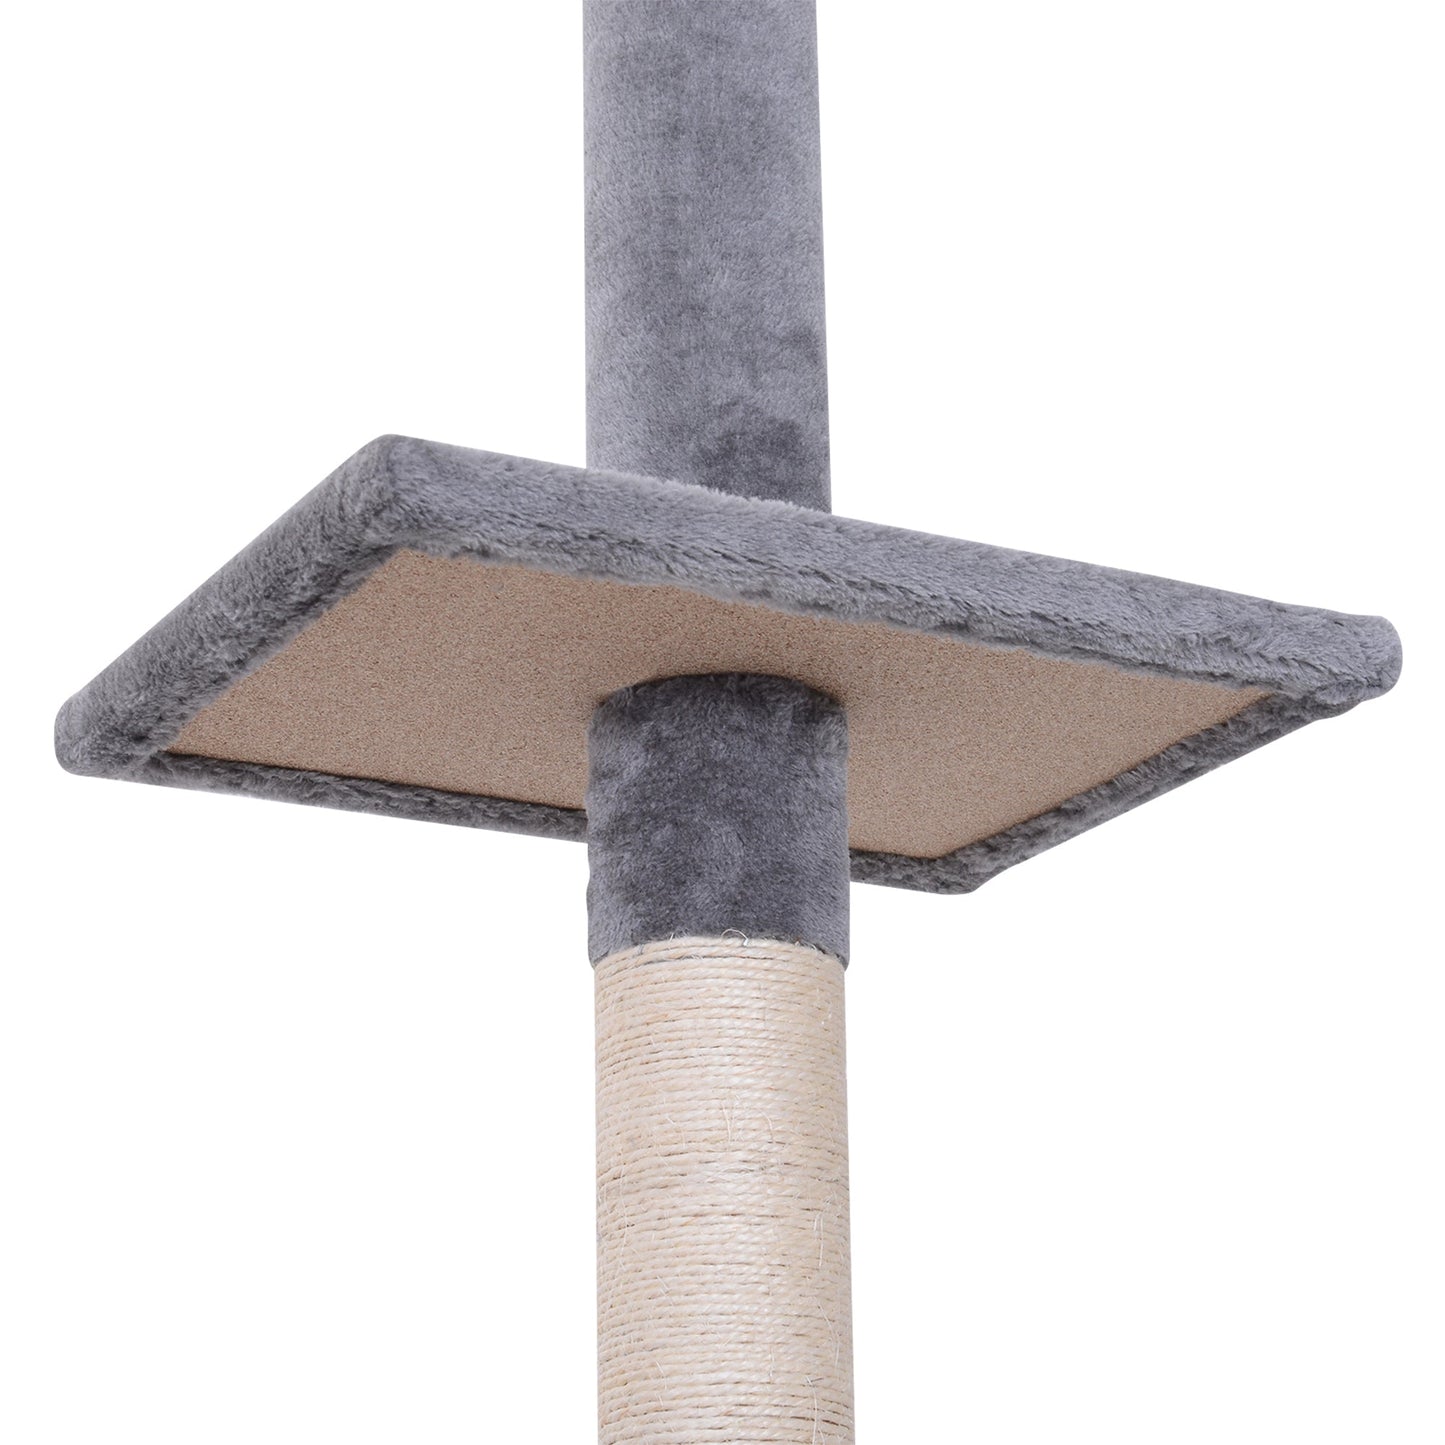 8.5ft Cat Climbing Tree 5-Tier Cat Activity Center Floor-to-Ceiling Cat Climber Toy with Scratching Post Play Rest Post Pet Furniture Grey at Gallery Canada